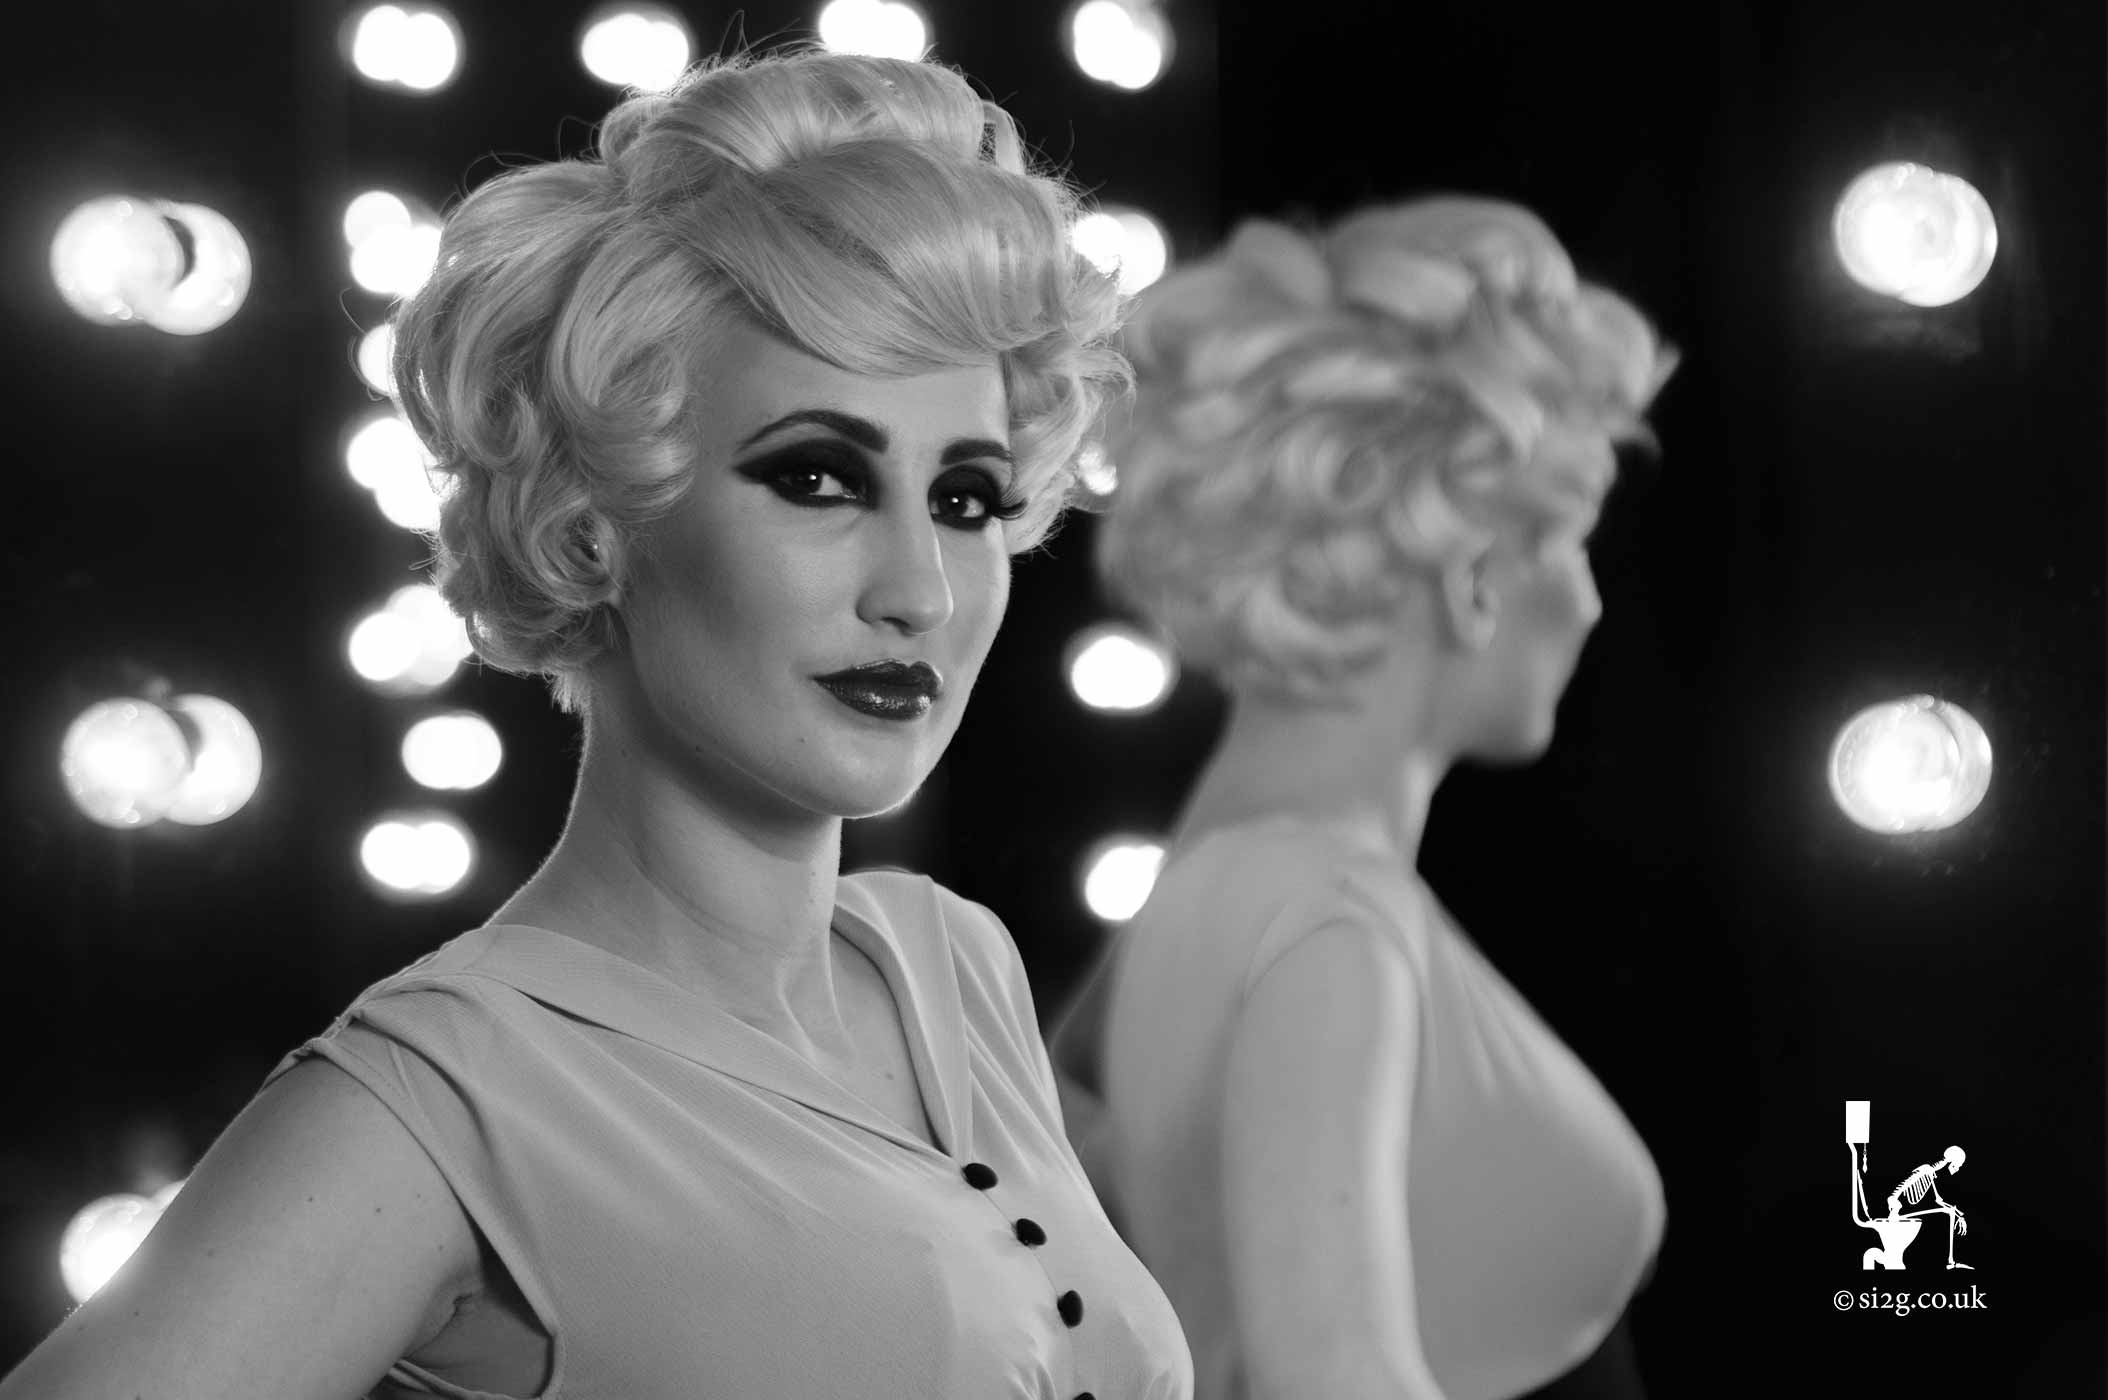 Vintage Hair Stylist - Commissioned by a popular London Hair Studio where a stylist specialises in vintage hair styles.